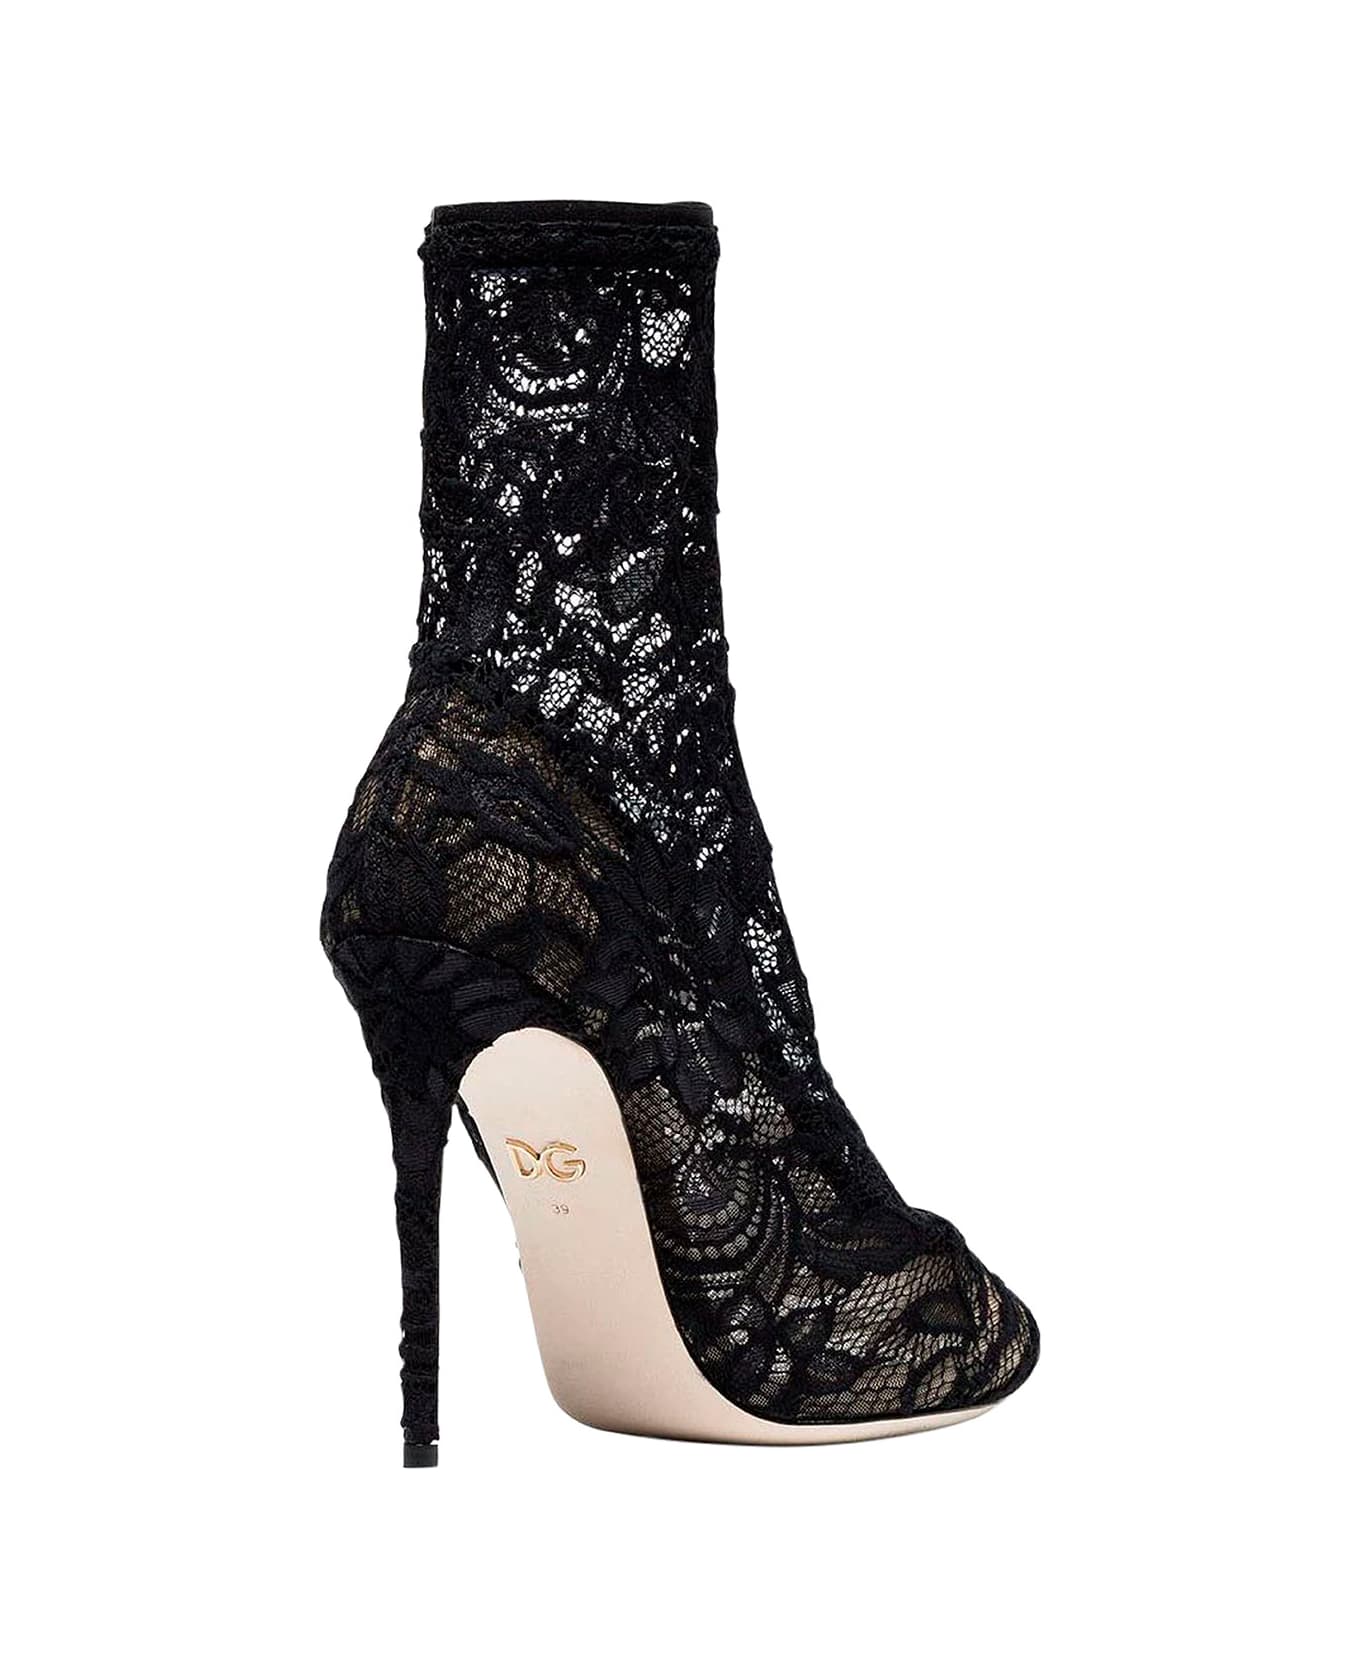 Dolce & Gabbana Black Pointed Boots In Chaintilly Lace Woman - Black